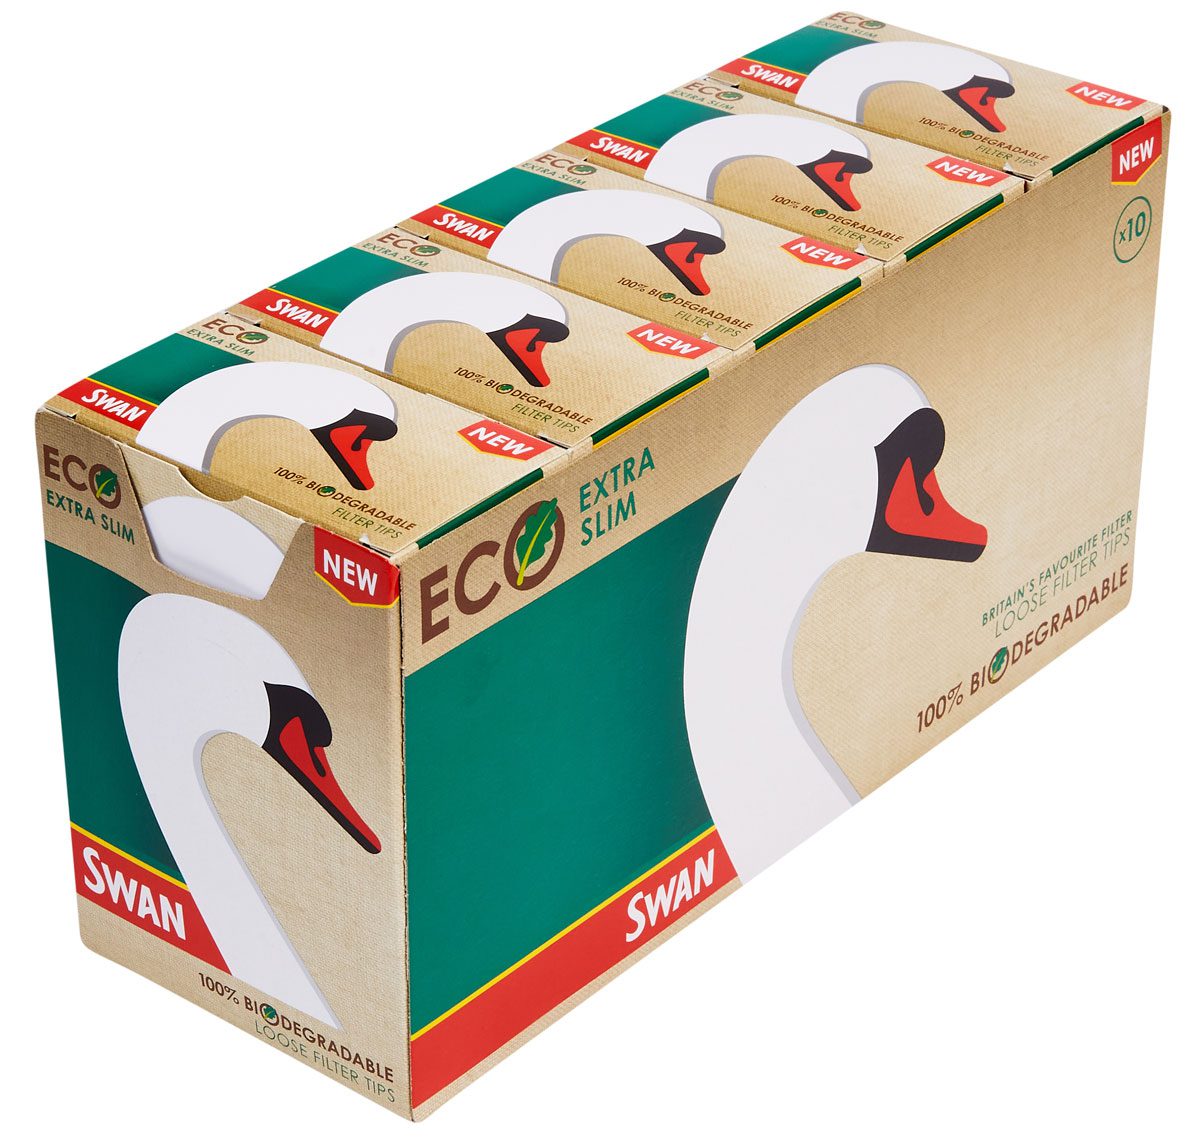 The Swan Eco Loose Filter Tips are 100% biodegradable – adding to the brand's sustainability credentials.